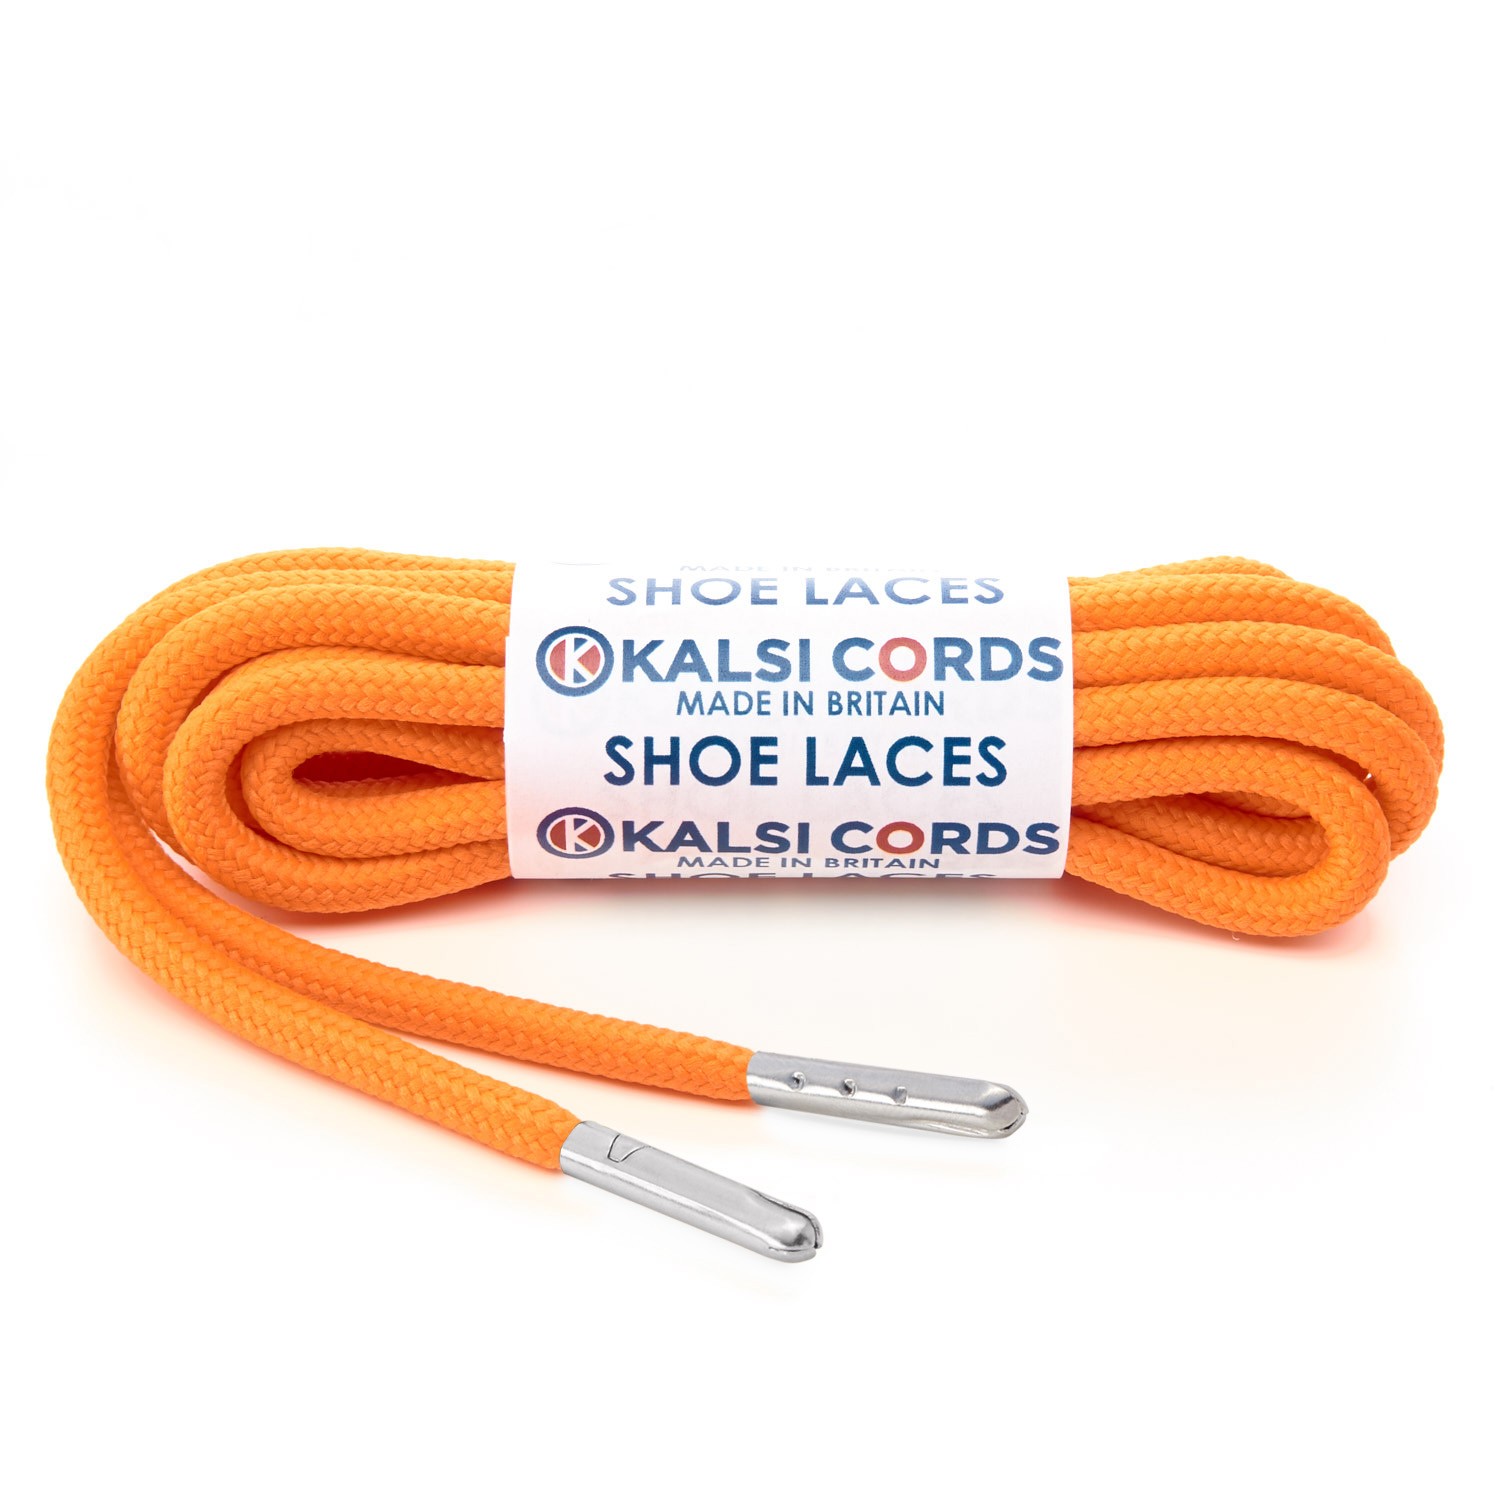 T621 5mm Round Polyester Shoe Laces Fluorescent Orange 1 Silver Metal Tip Kalsi Cords